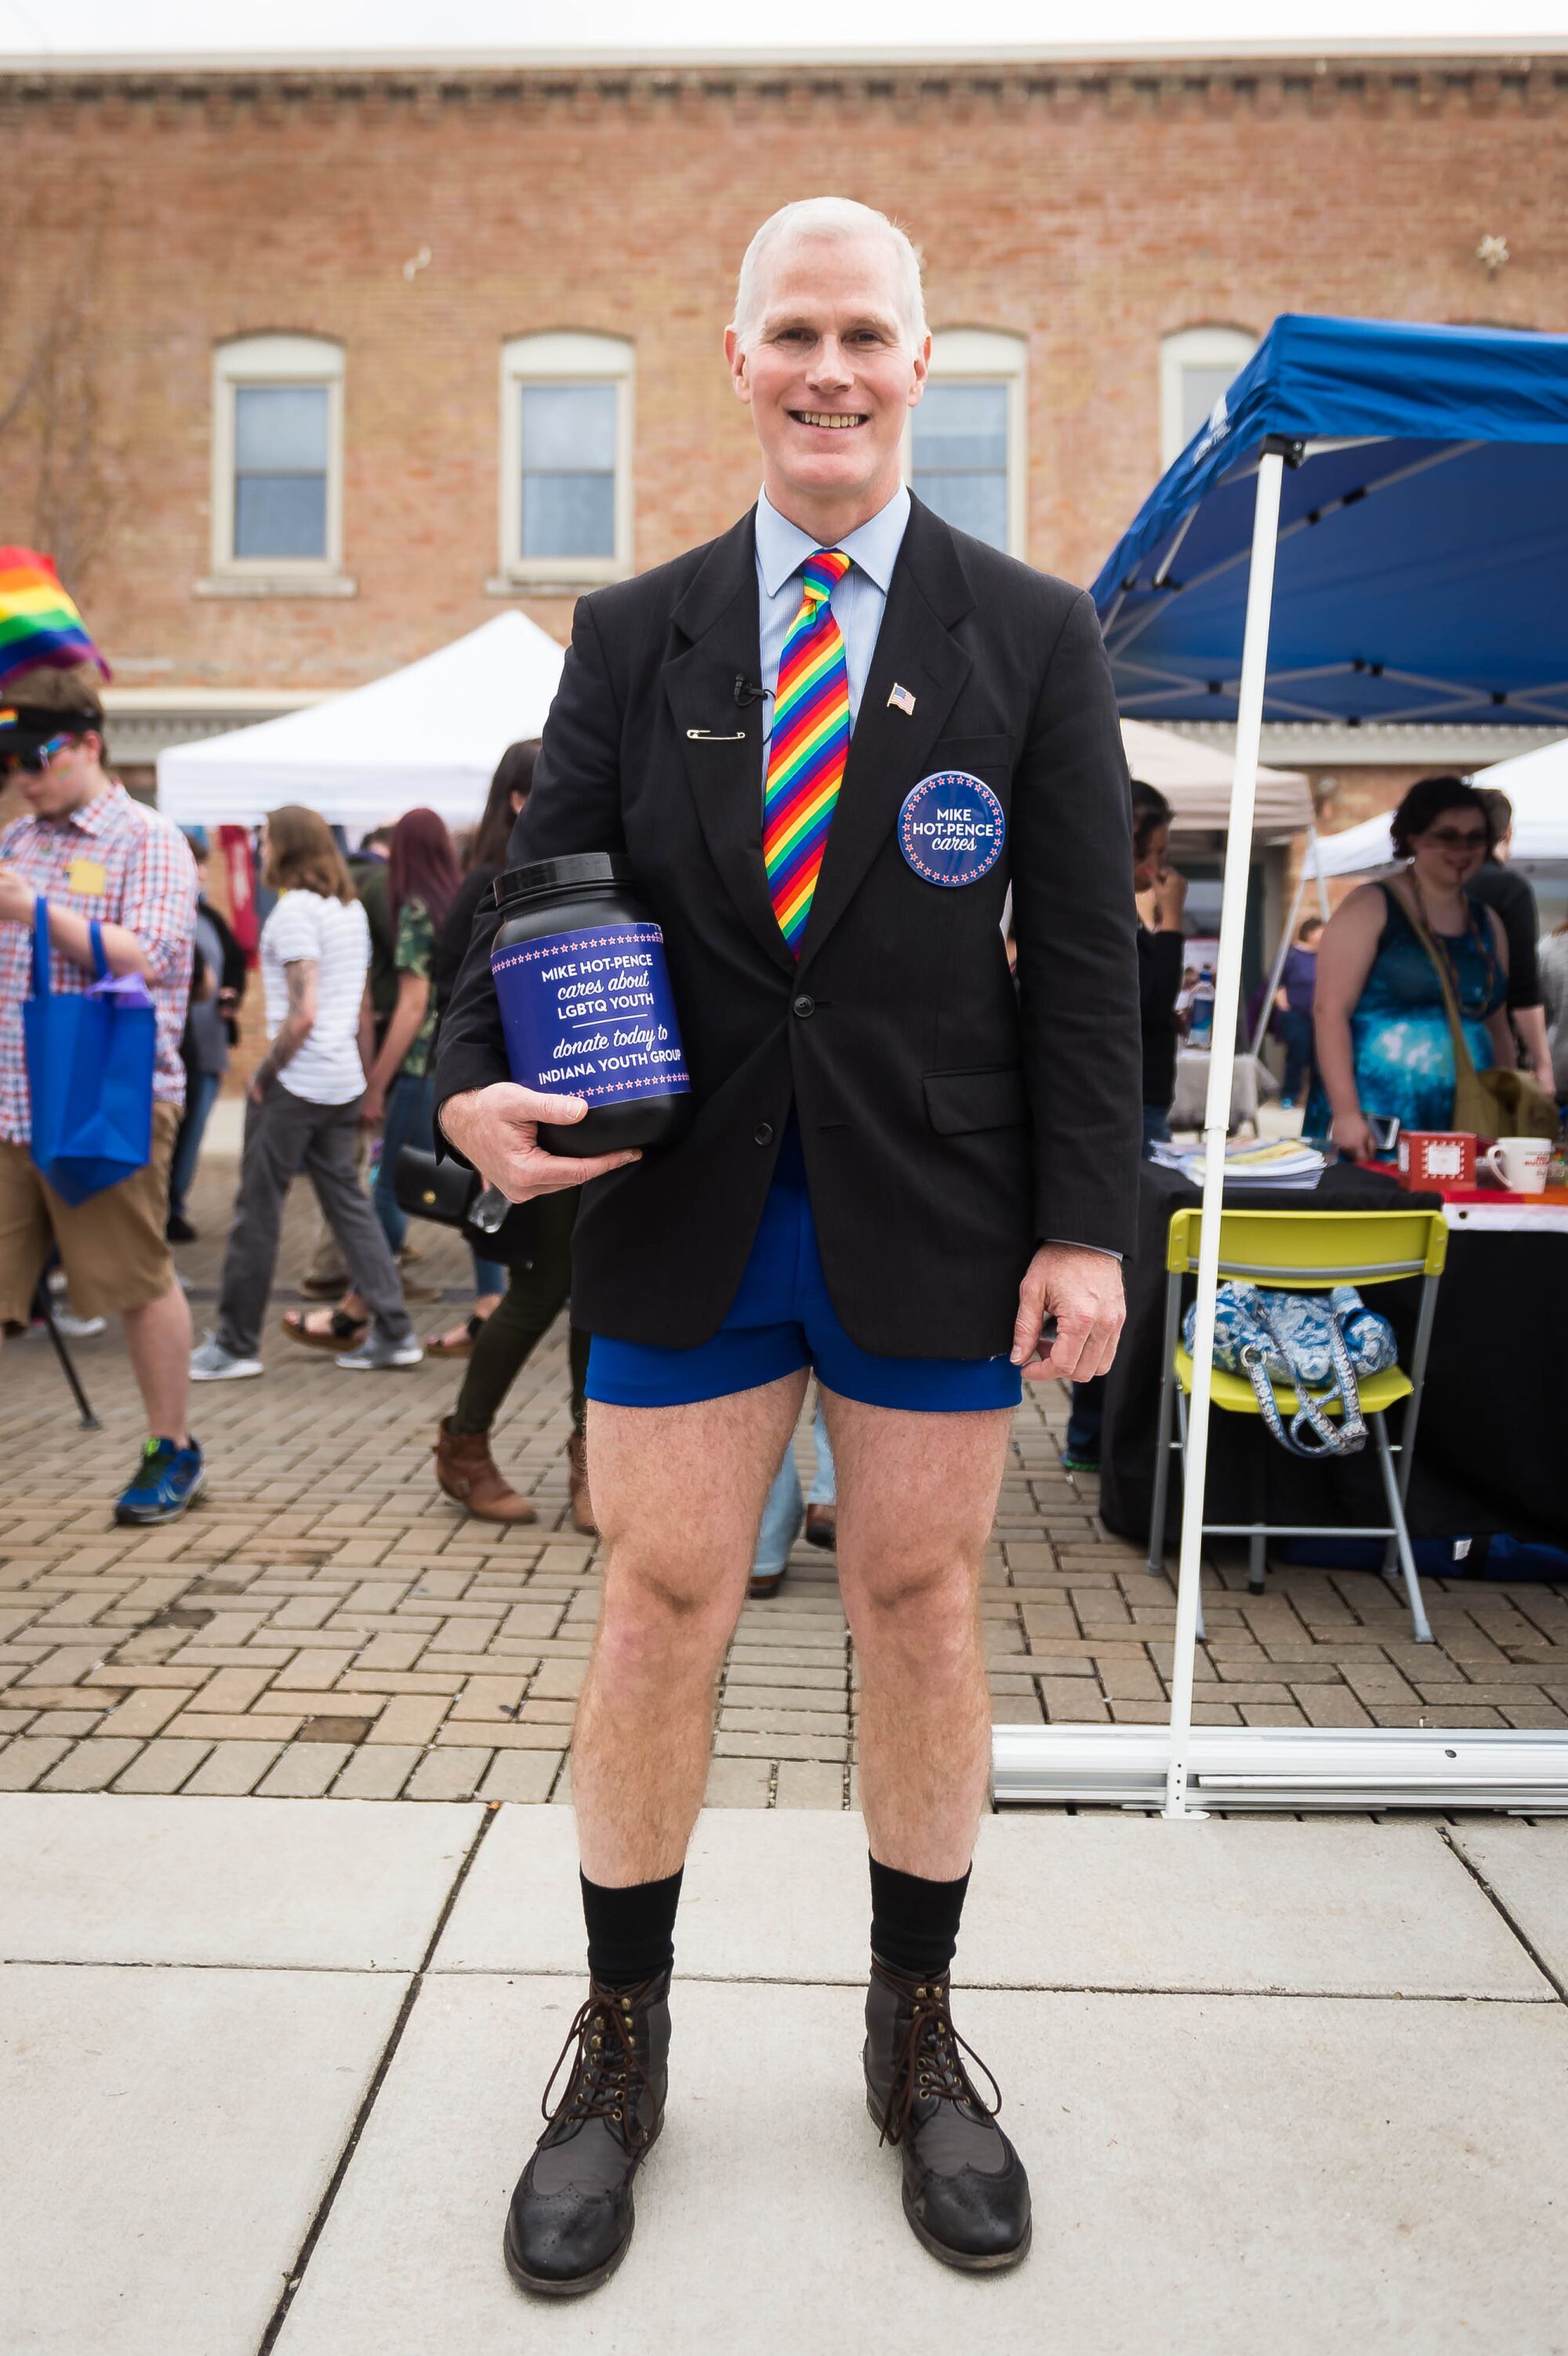 Glen Pannell, a Mike Pence lookalike, wears hot pants with a jacket and tie while acting as "Mike Hot-Pence."